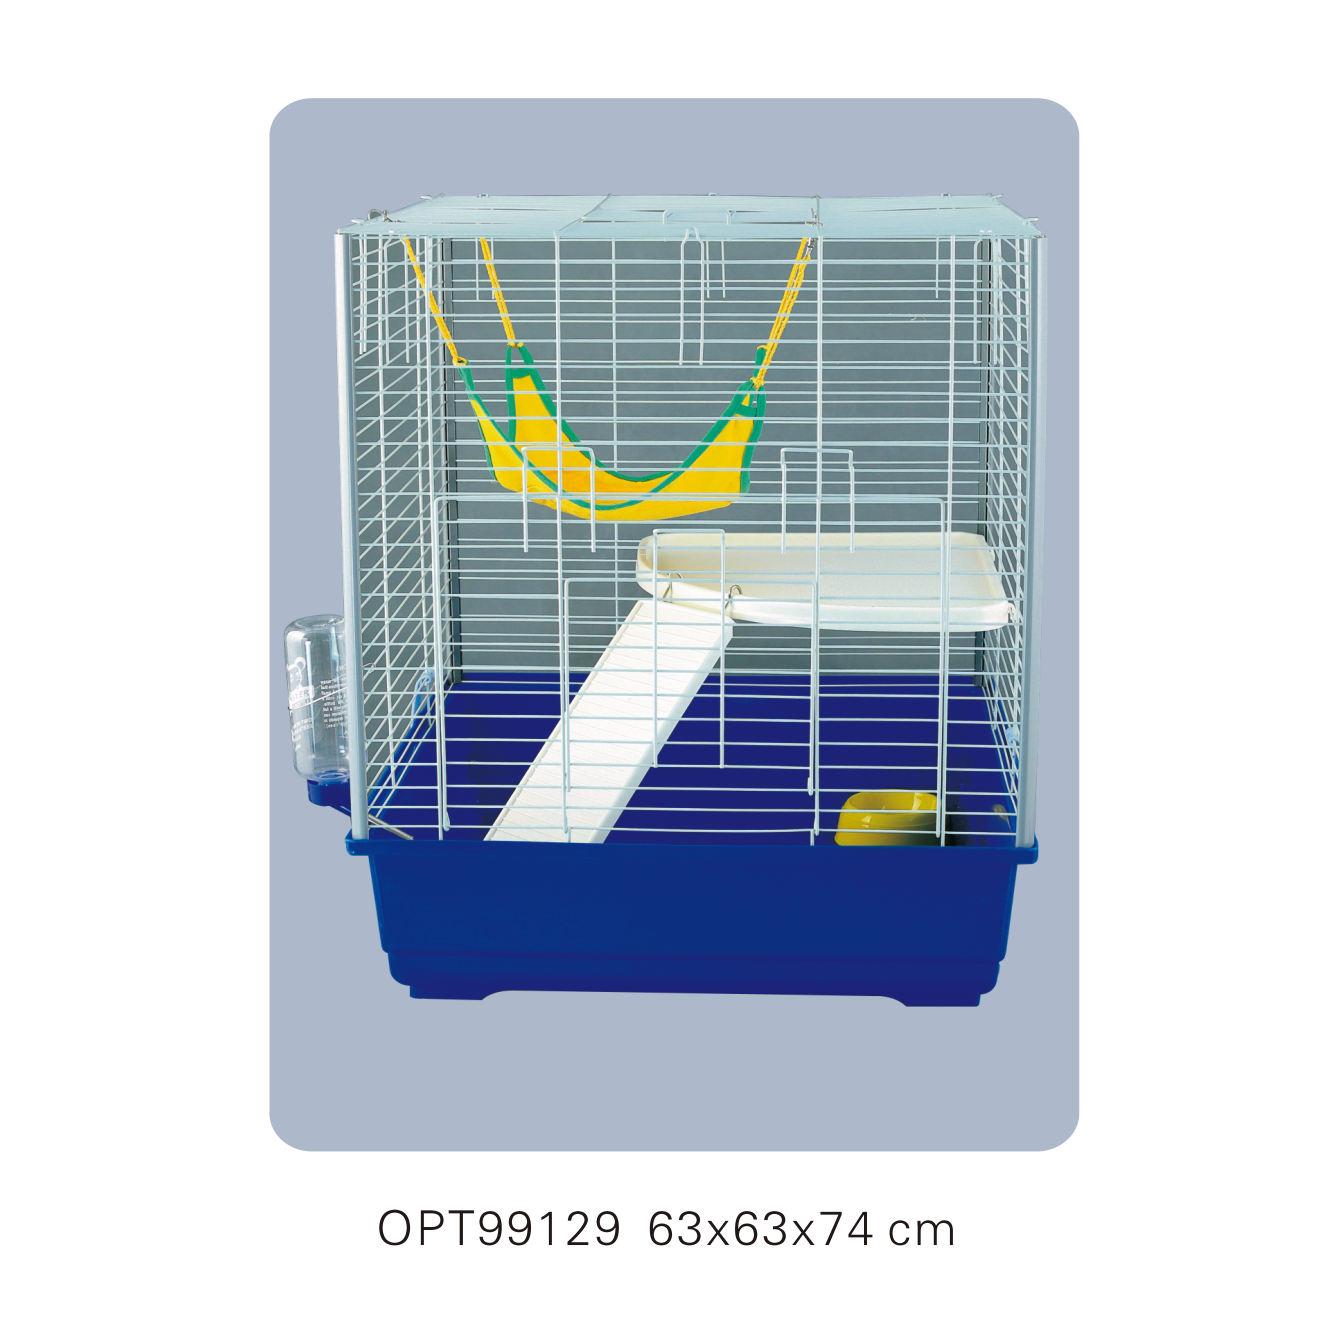 OPT99129 63x63x74cm small animal cages